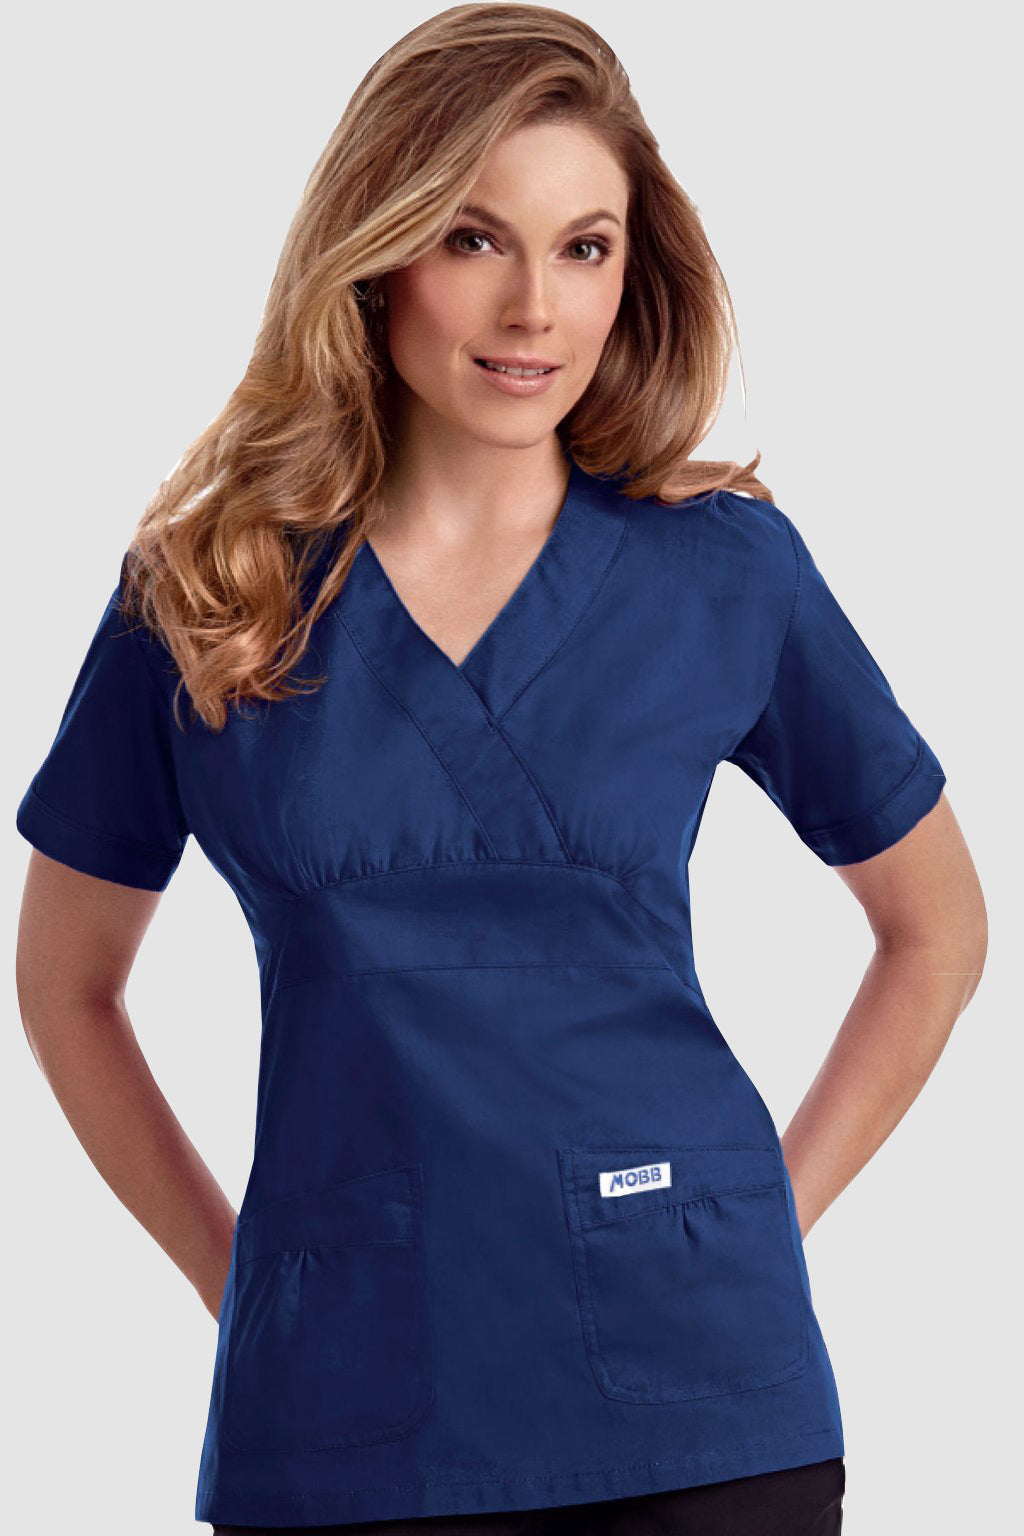 Product - Clearance Empire Tie Back Scrub Top by MOBB